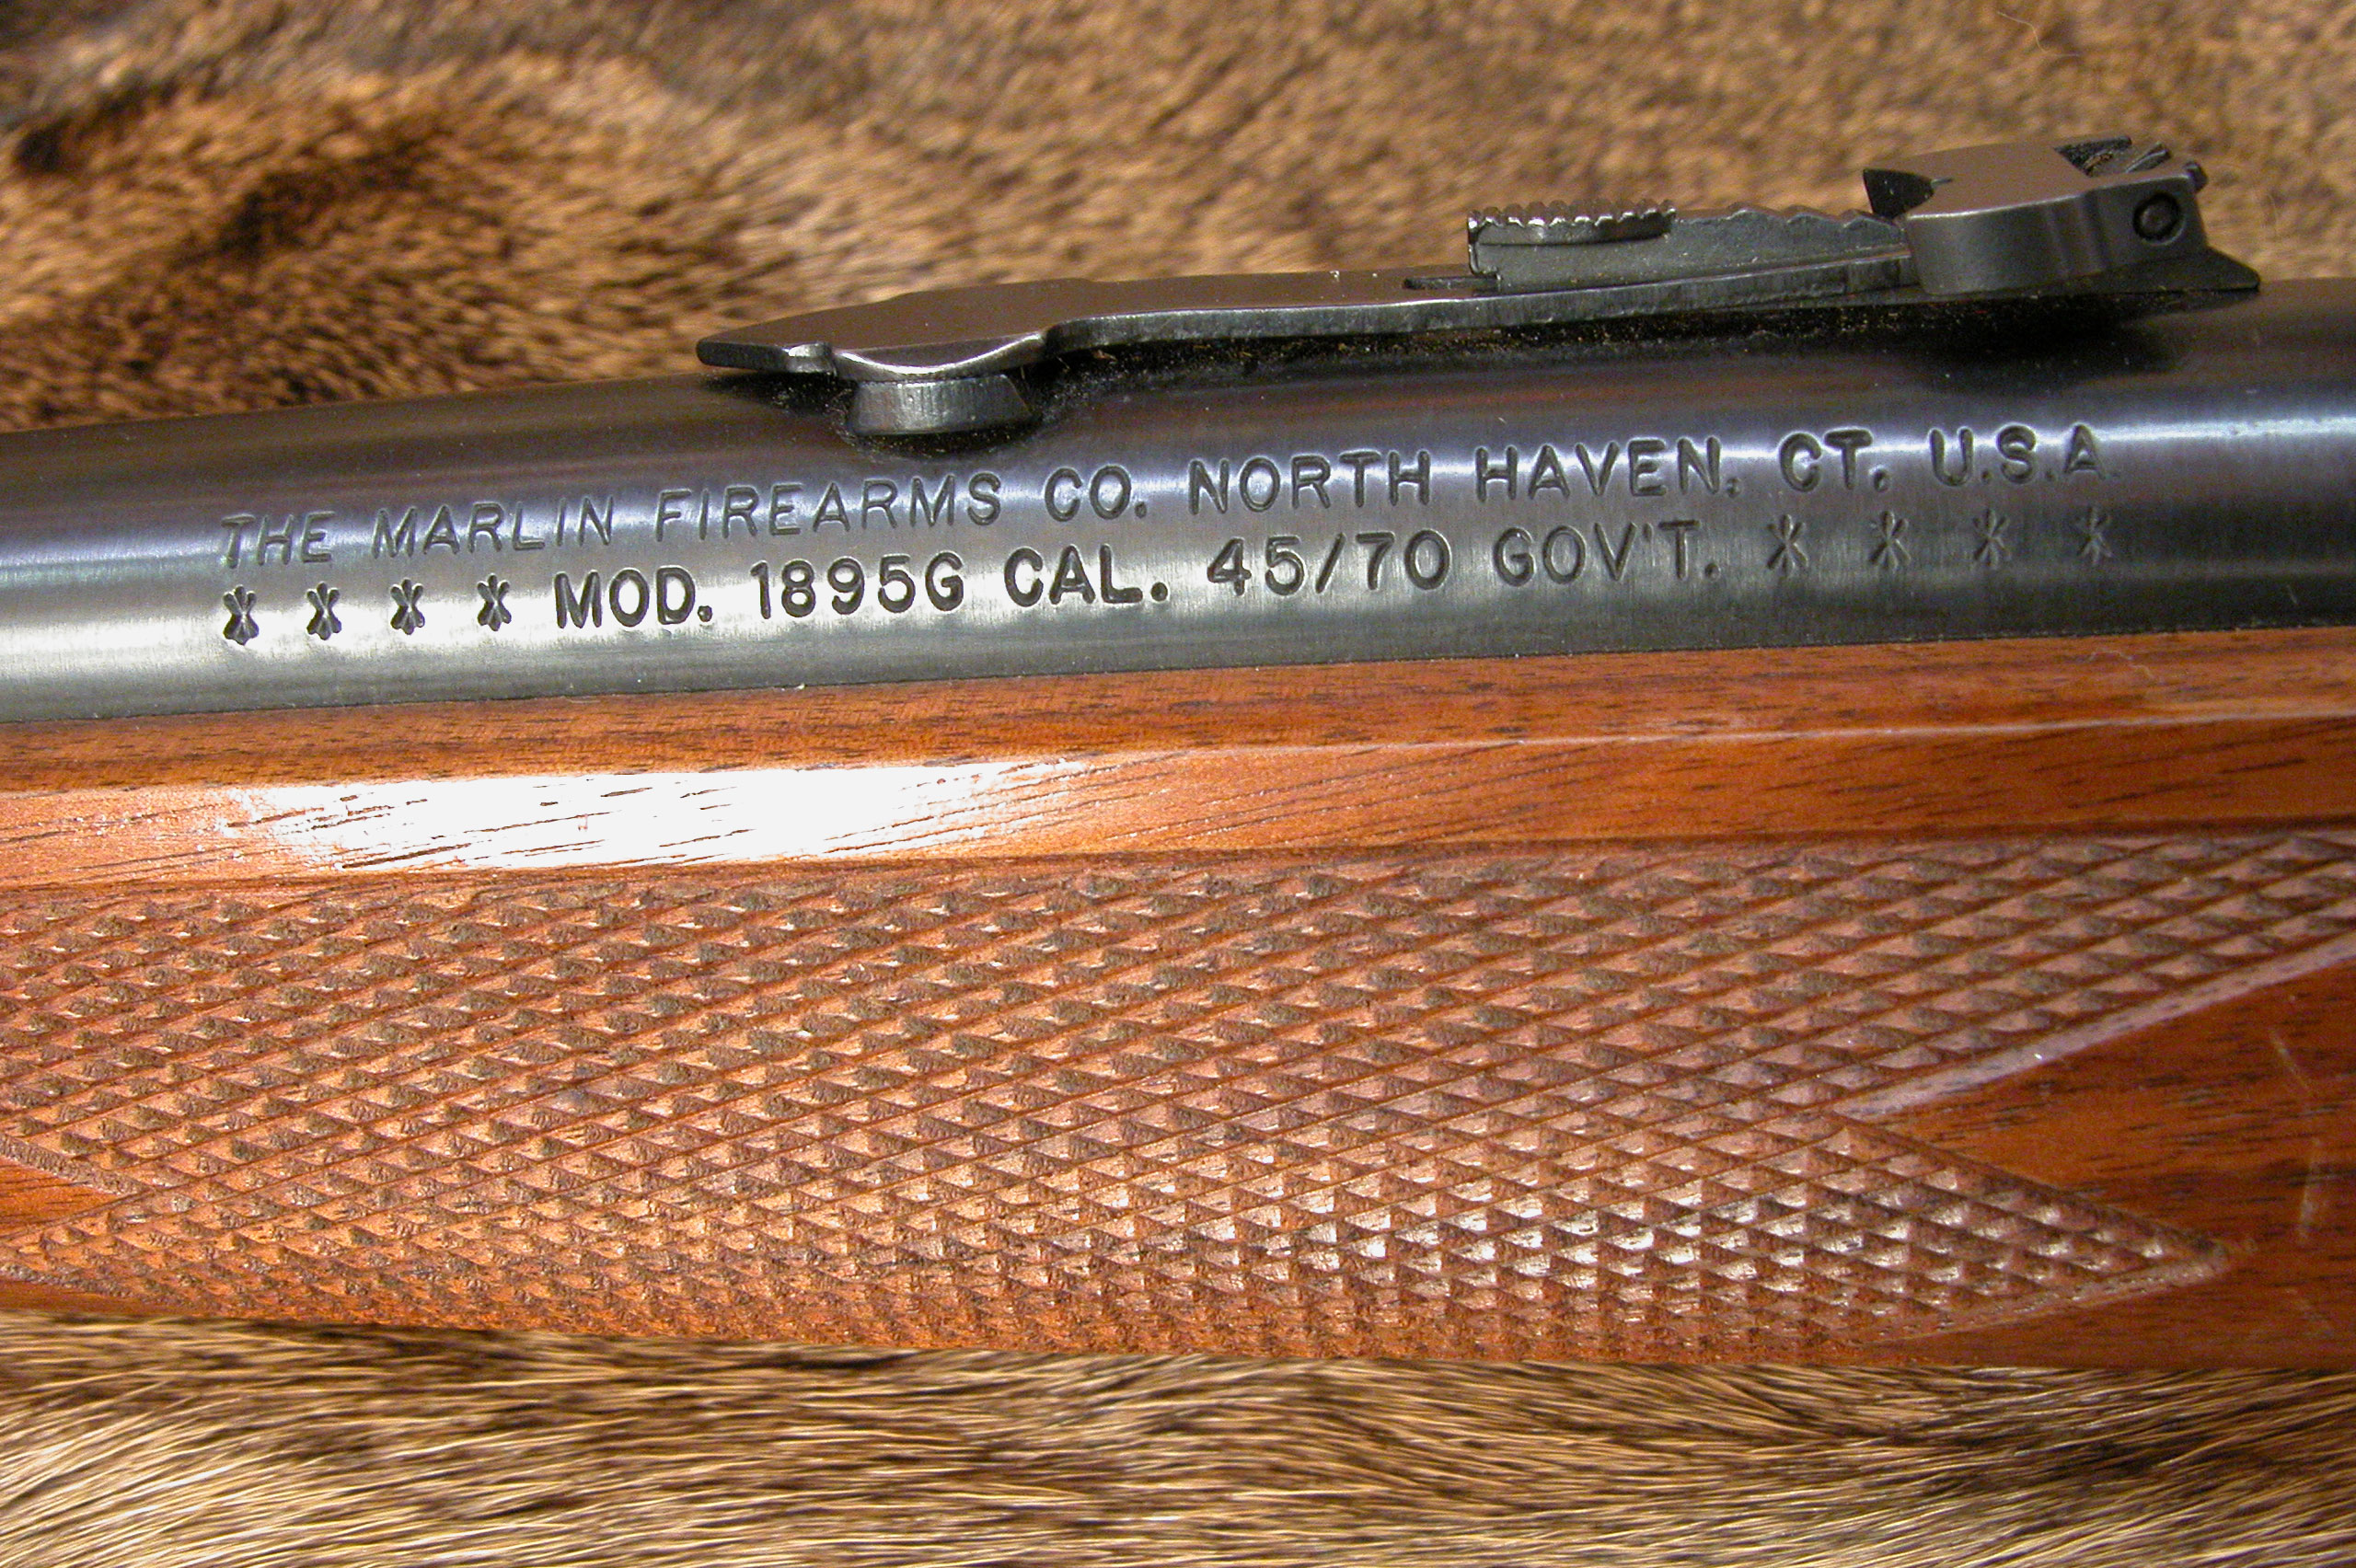 The barrel of a Marlin Model 1895G chambered in .45-70 Government.